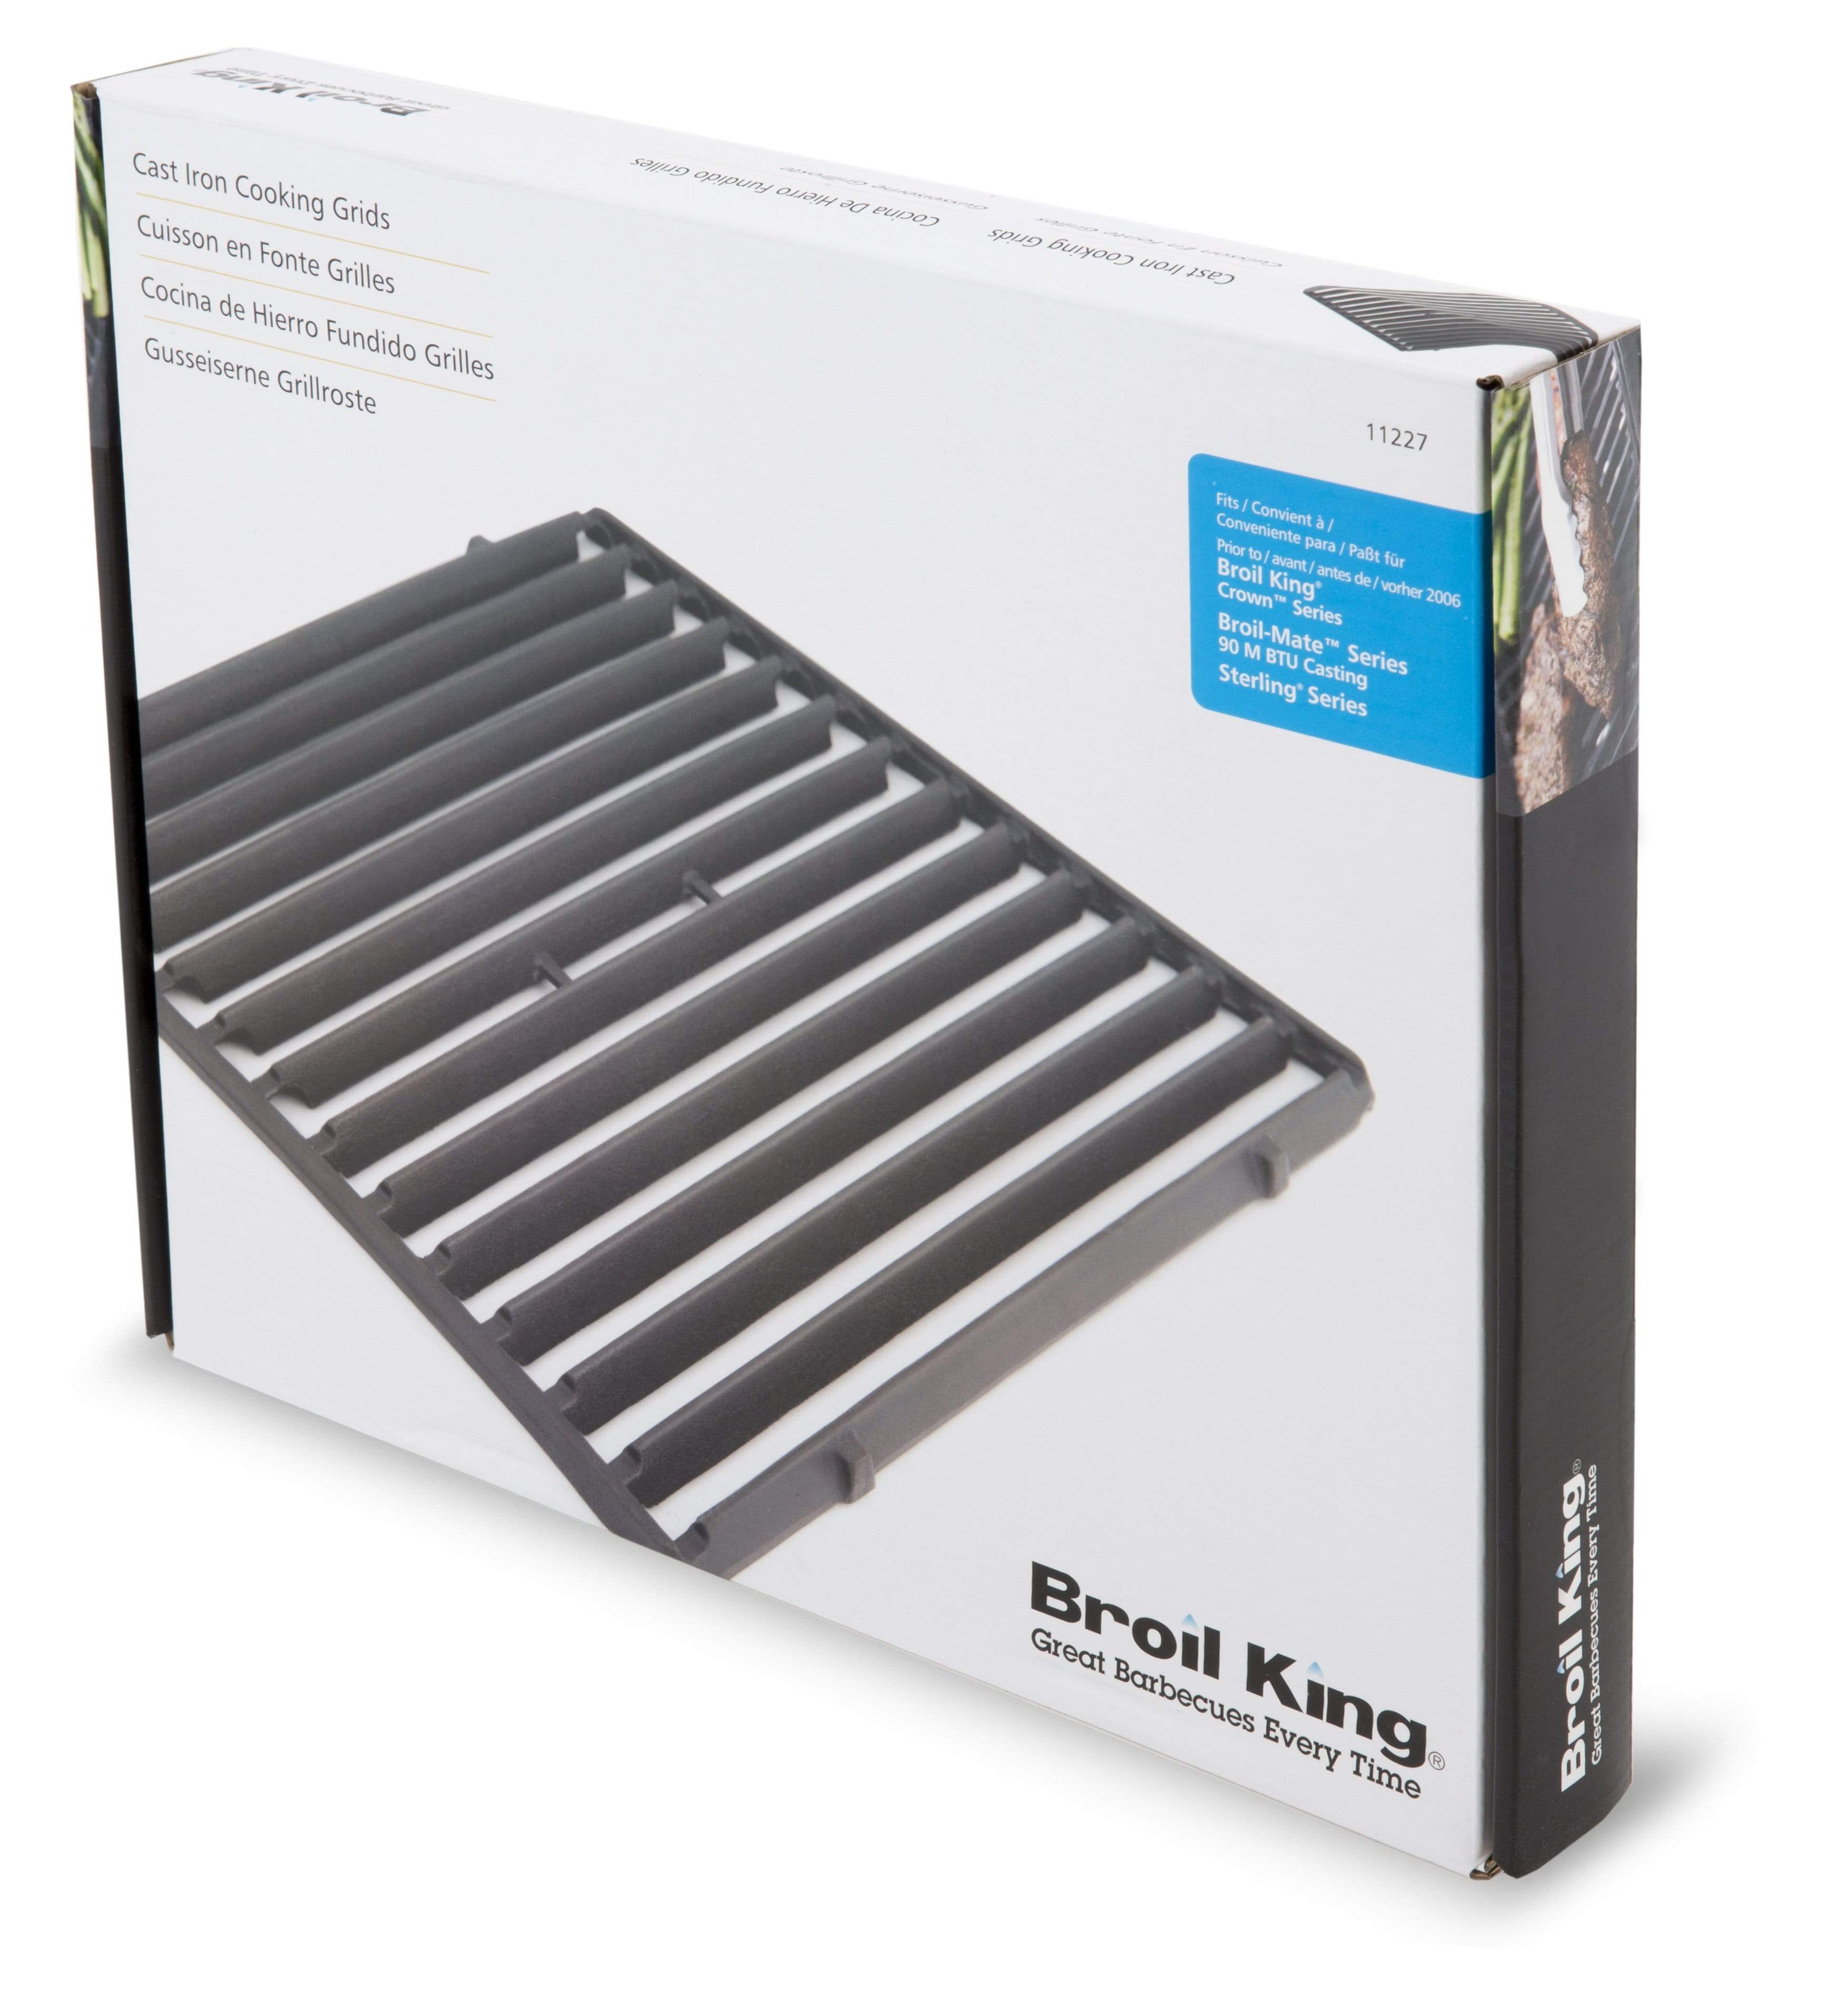 Broil King Broil King Accessories COOKING GRID - SIGNET / CROWN PRIOR 2006 - CAST IRON - 2 PC